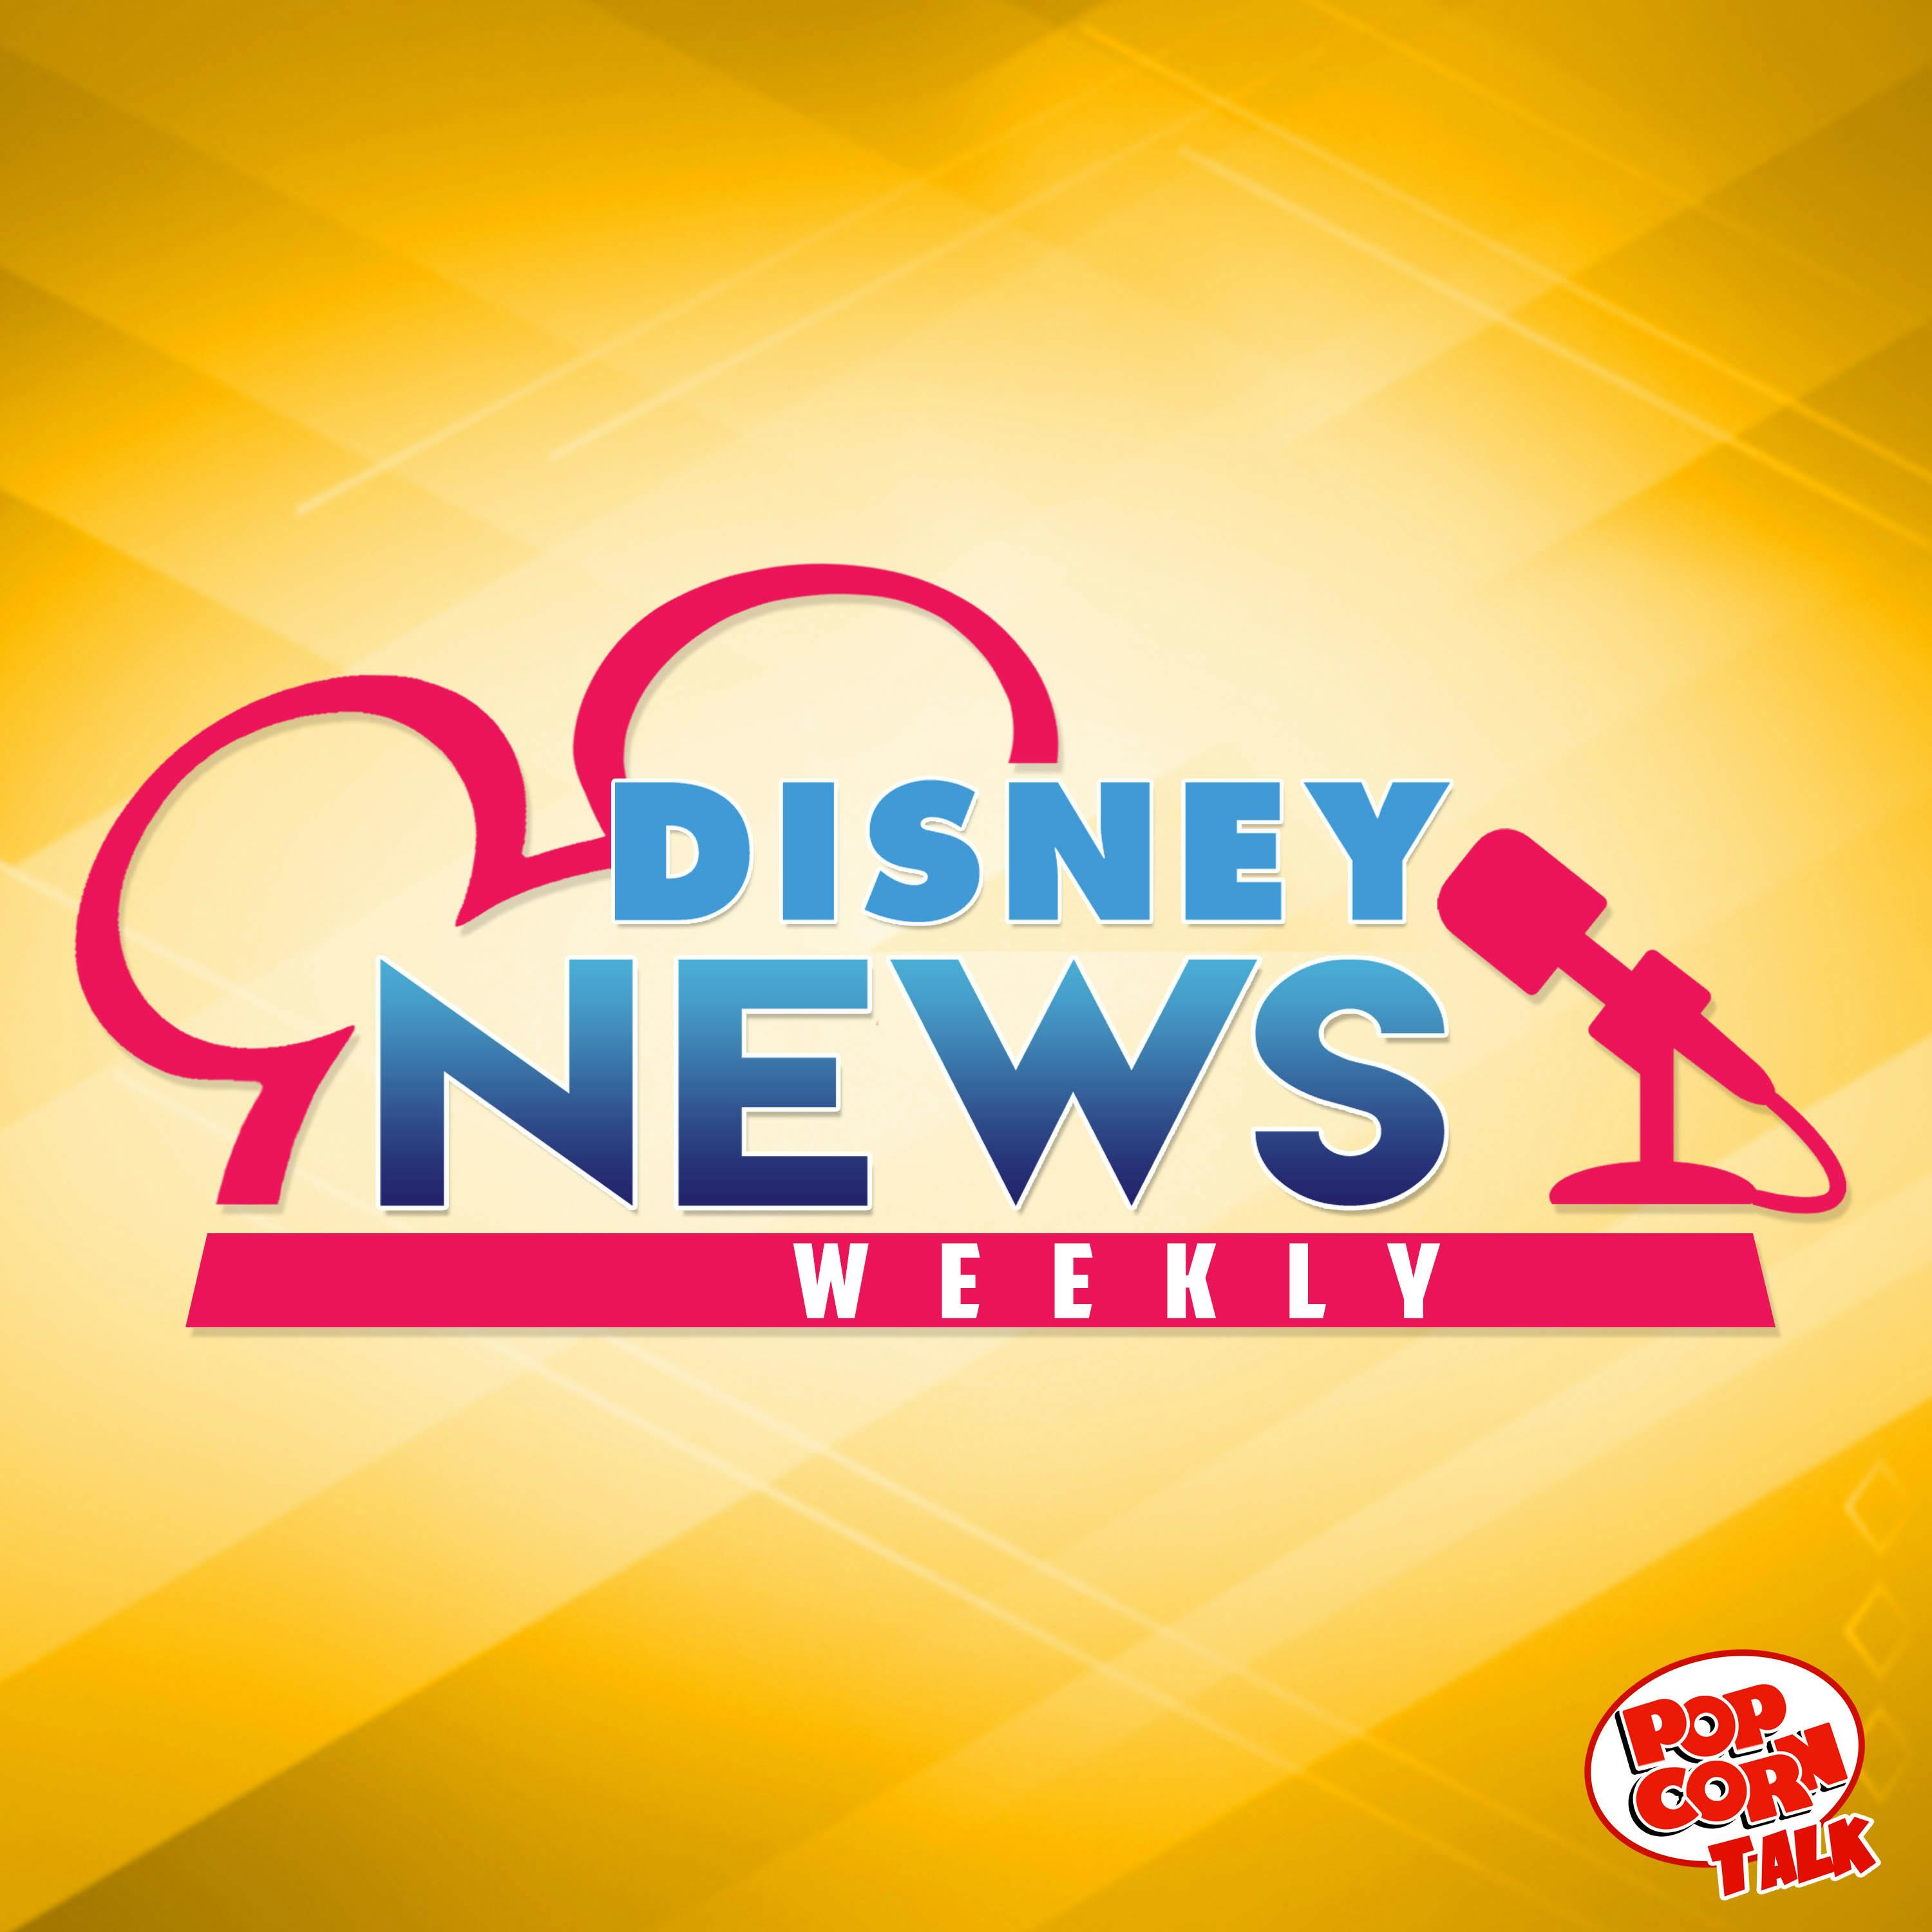 Disney Teases Jungle Cruise & Star Wars Episode 9 to feature Carrie Fisher! – Disney News Weekly 117